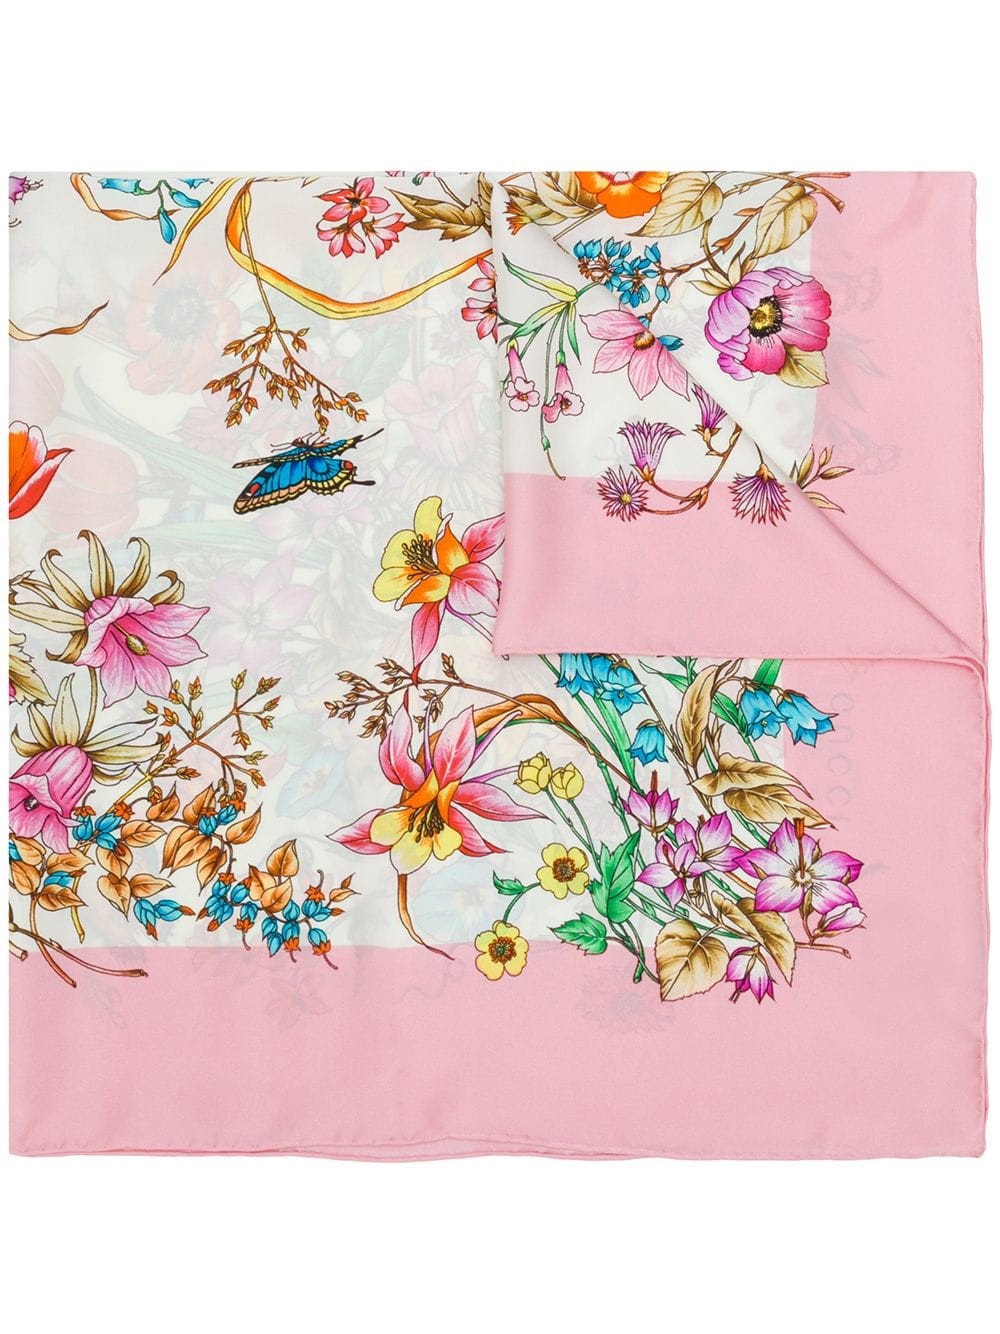 gucci FLORAL PRINT SCARF available on montiboutique.com - 25132